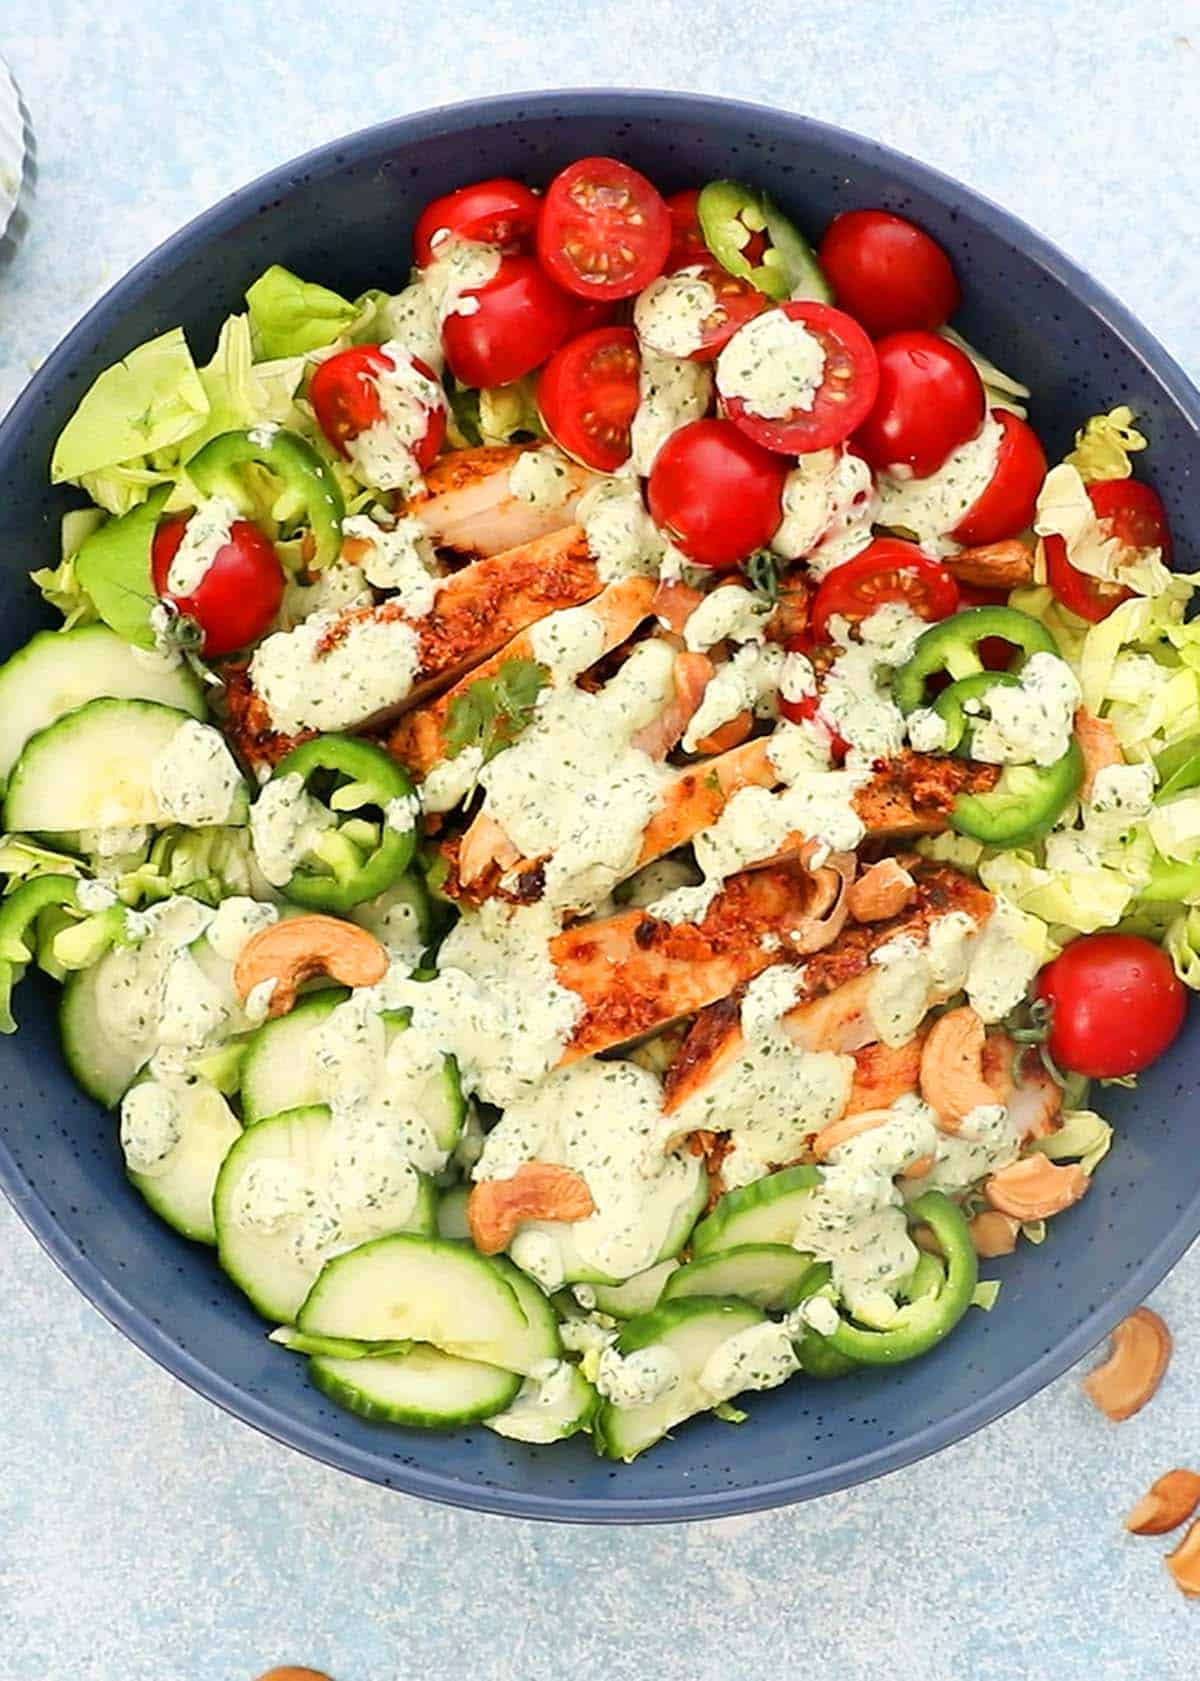 assembled chicken salad in a large blue bowl.